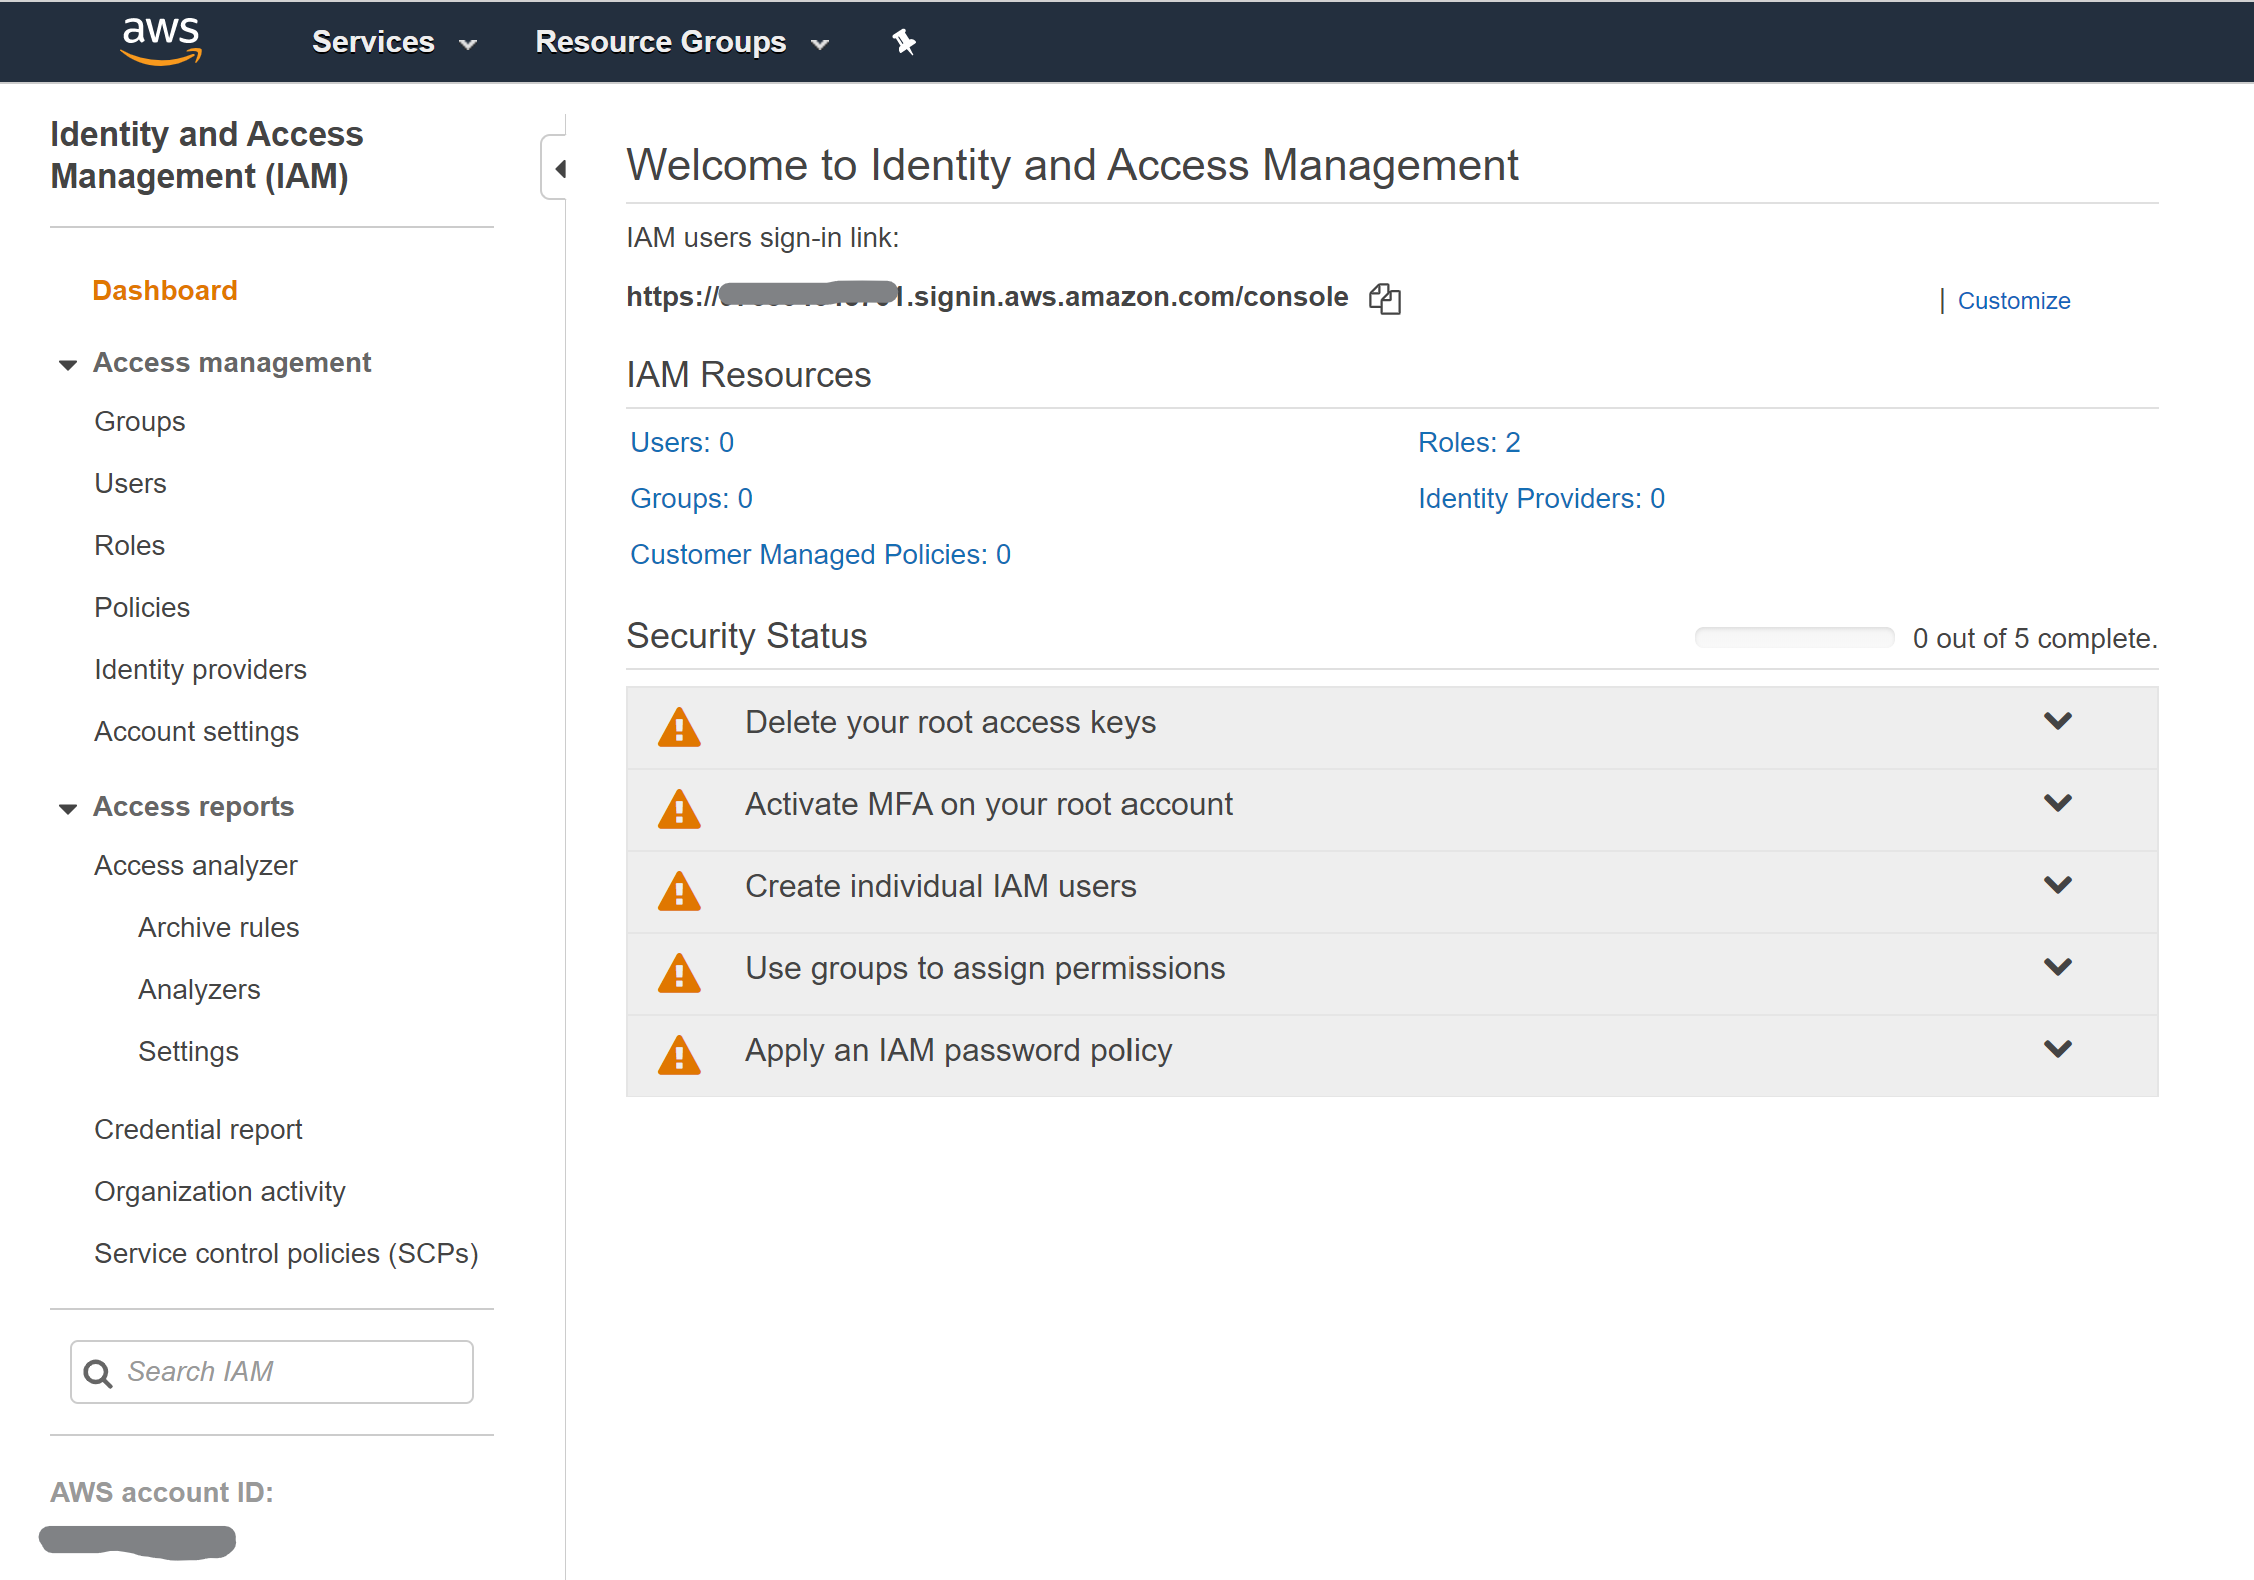 A screenshot of an identity and access management AWS cloud console.